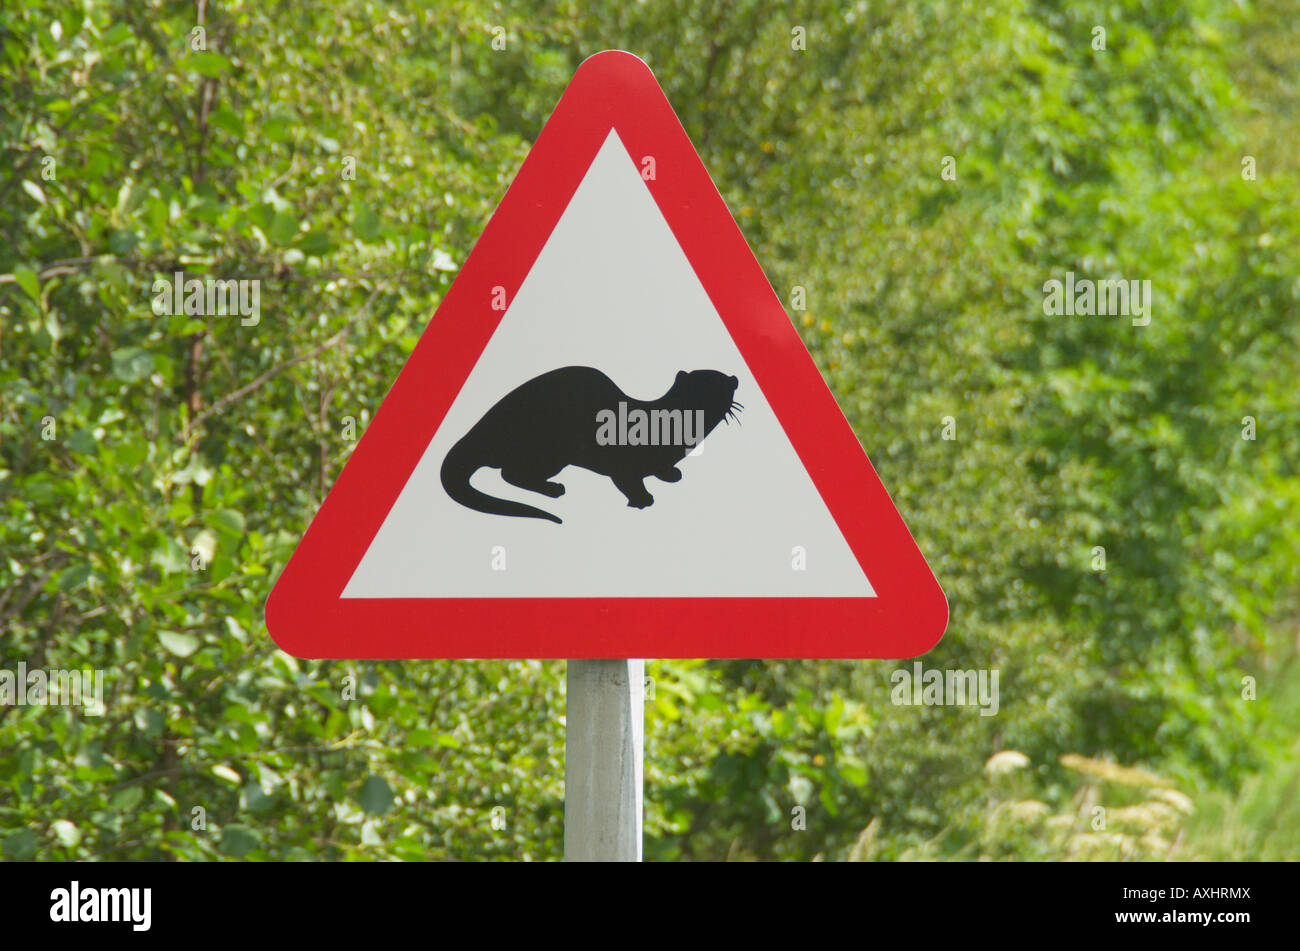 Otter warning sign against a background of green trees Stock Photo